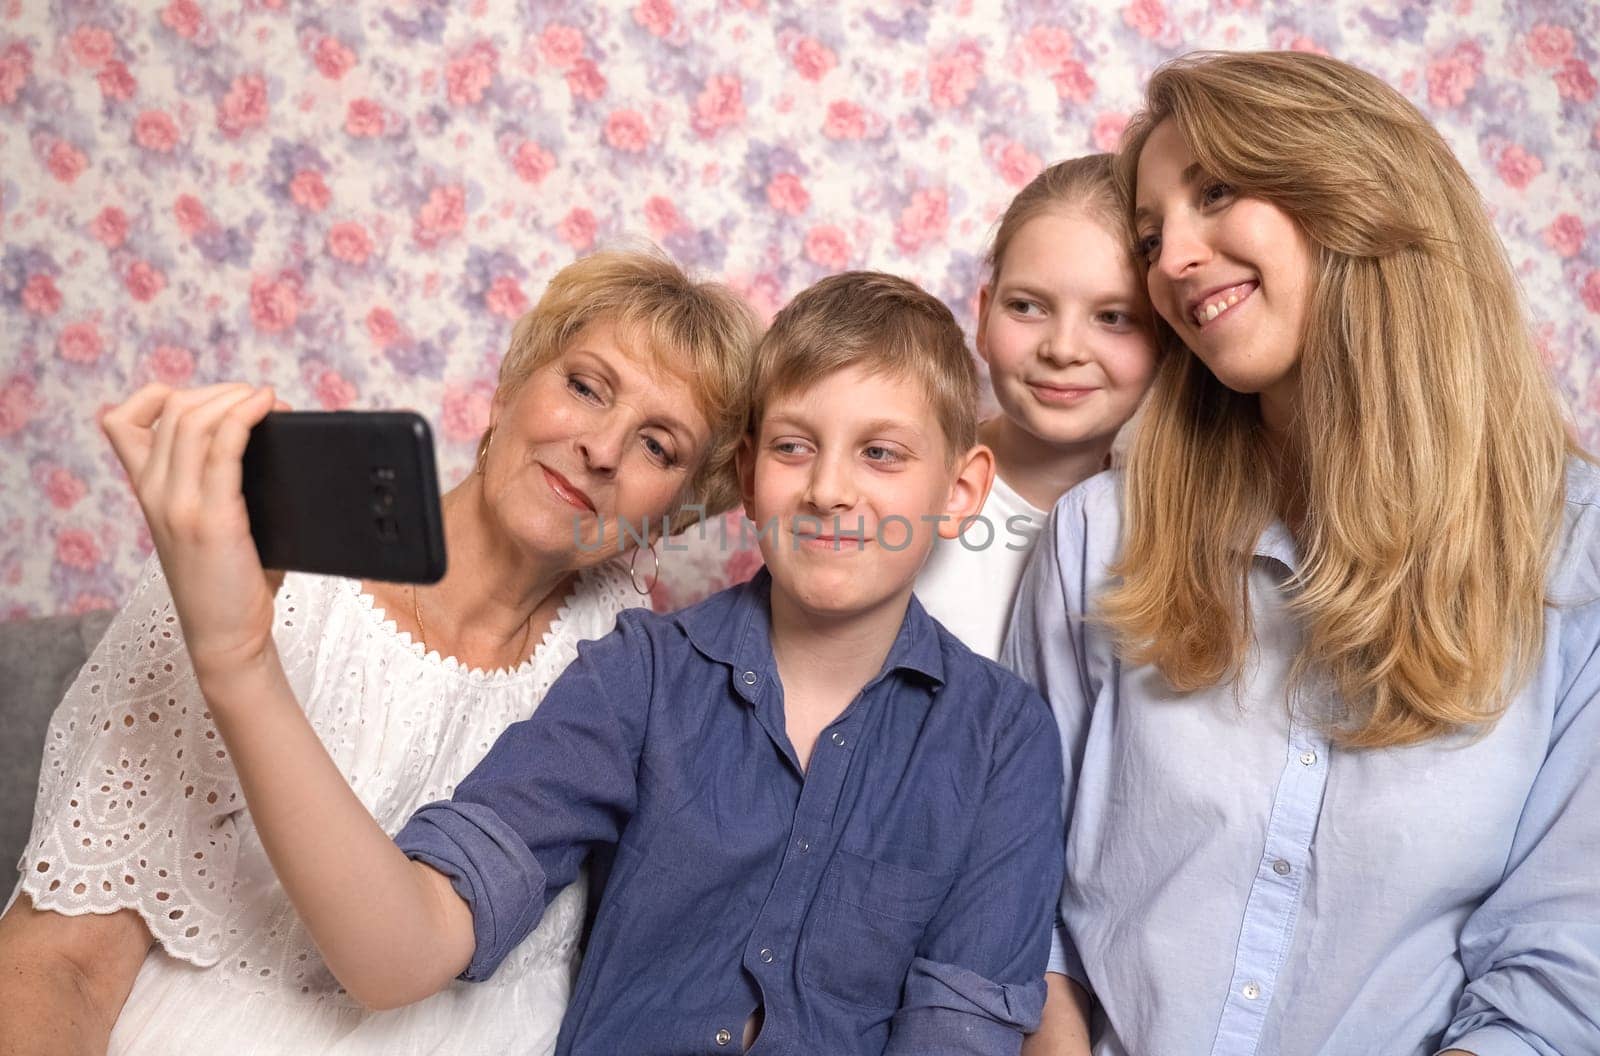 The boy takes a selfie of the family sitting on the sofa in the room by Sd28DimoN_1976